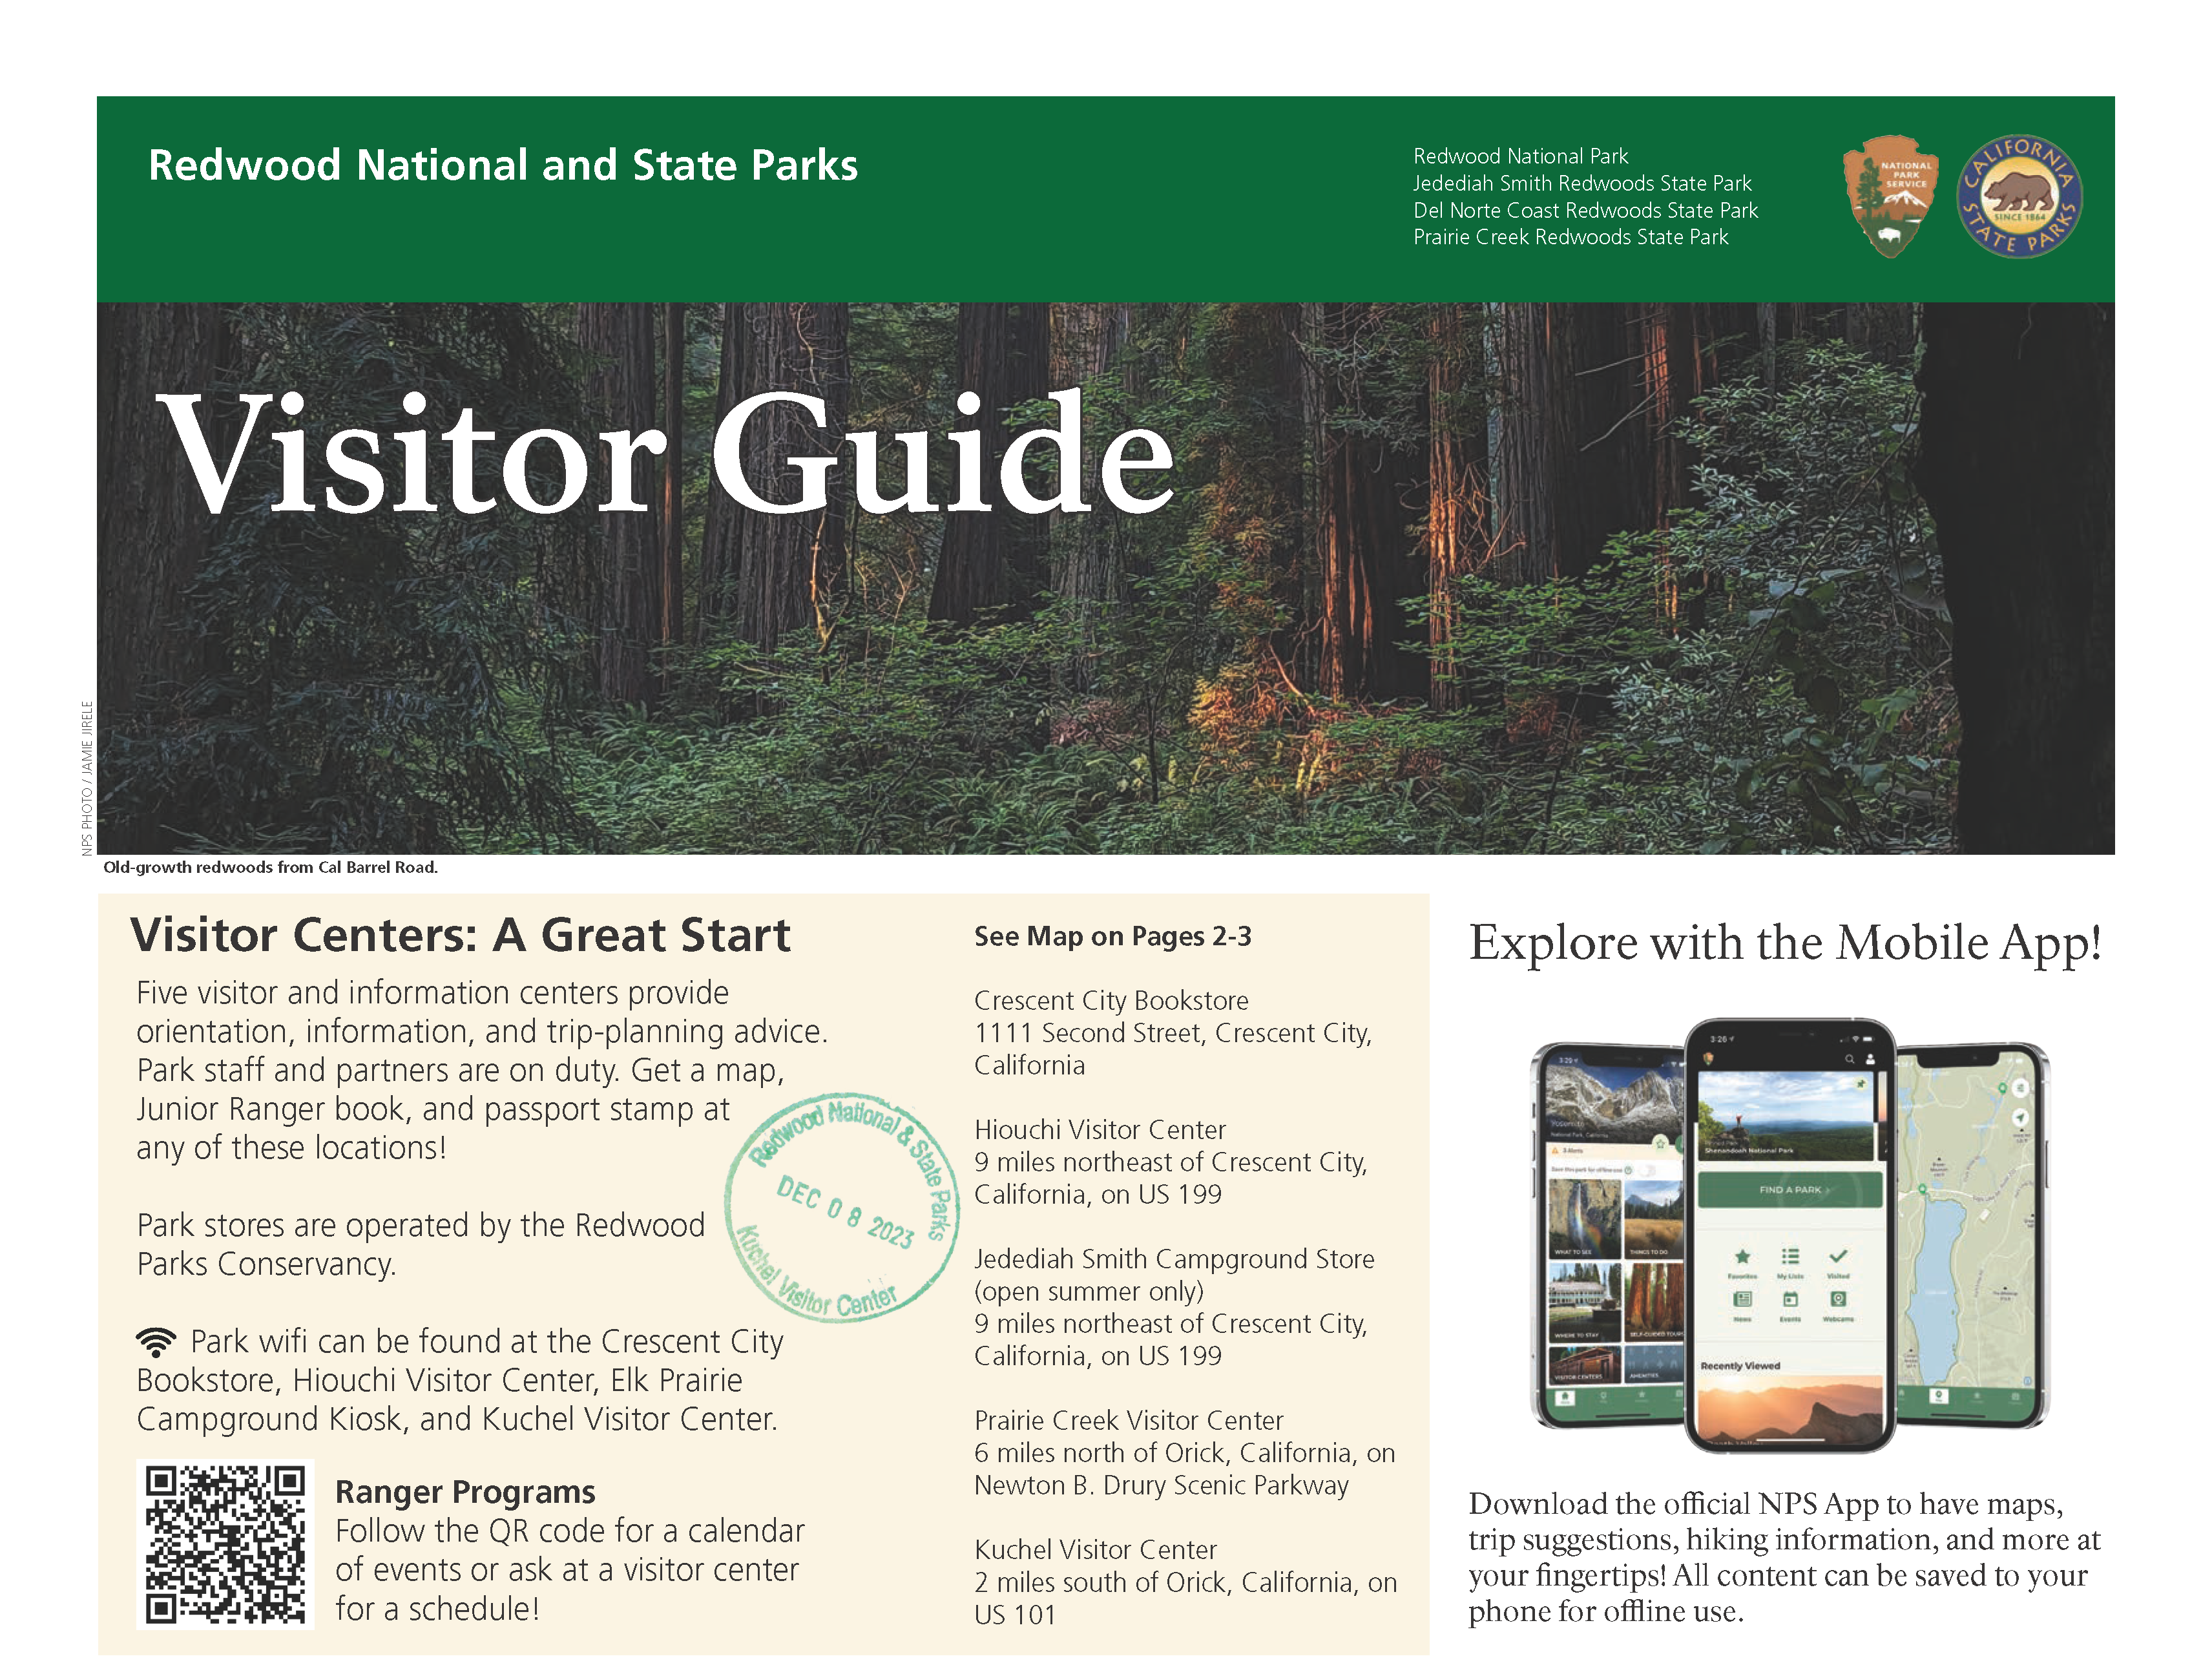 Front page of a visitor guide for Redwood National and State Parks